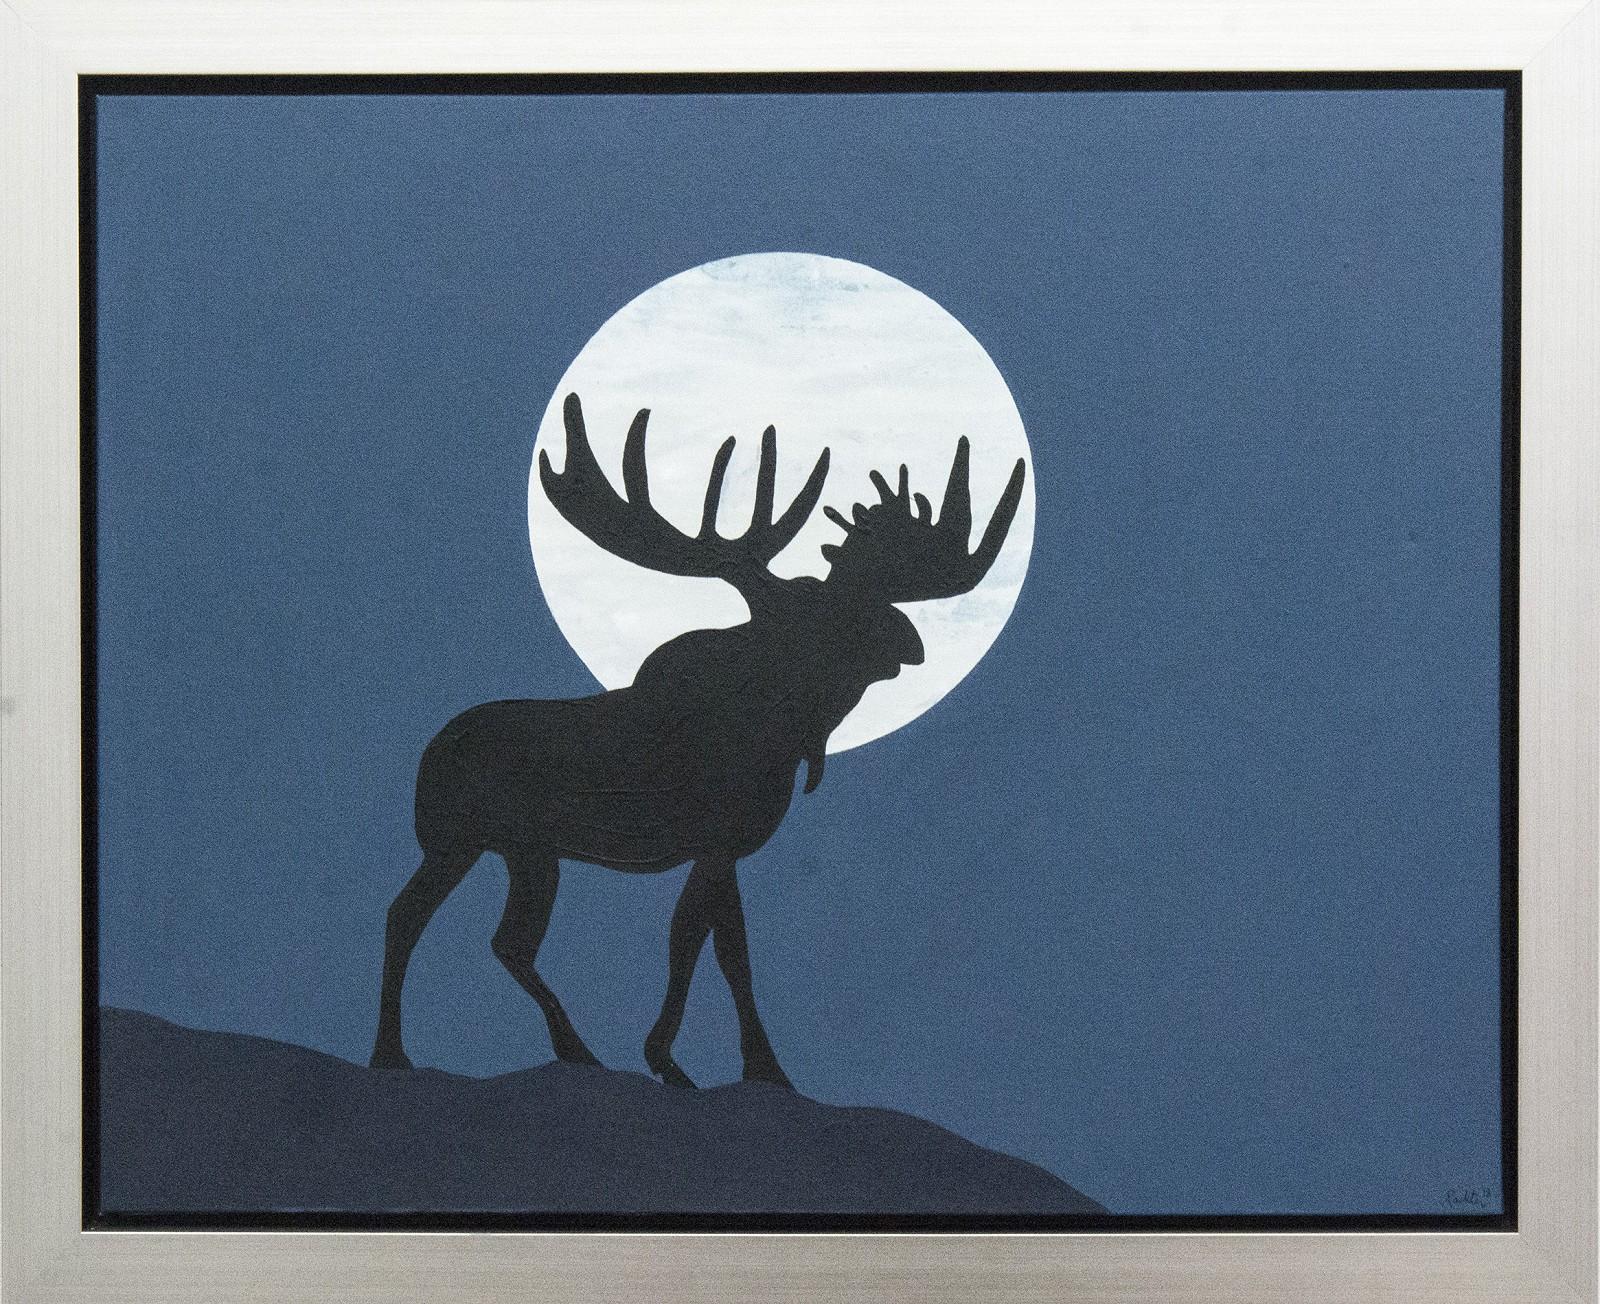 Charles Pachter Landscape Painting - Lunar Moose - pop-art, Canadiana, iconic, contemporary, acrylic on canvas